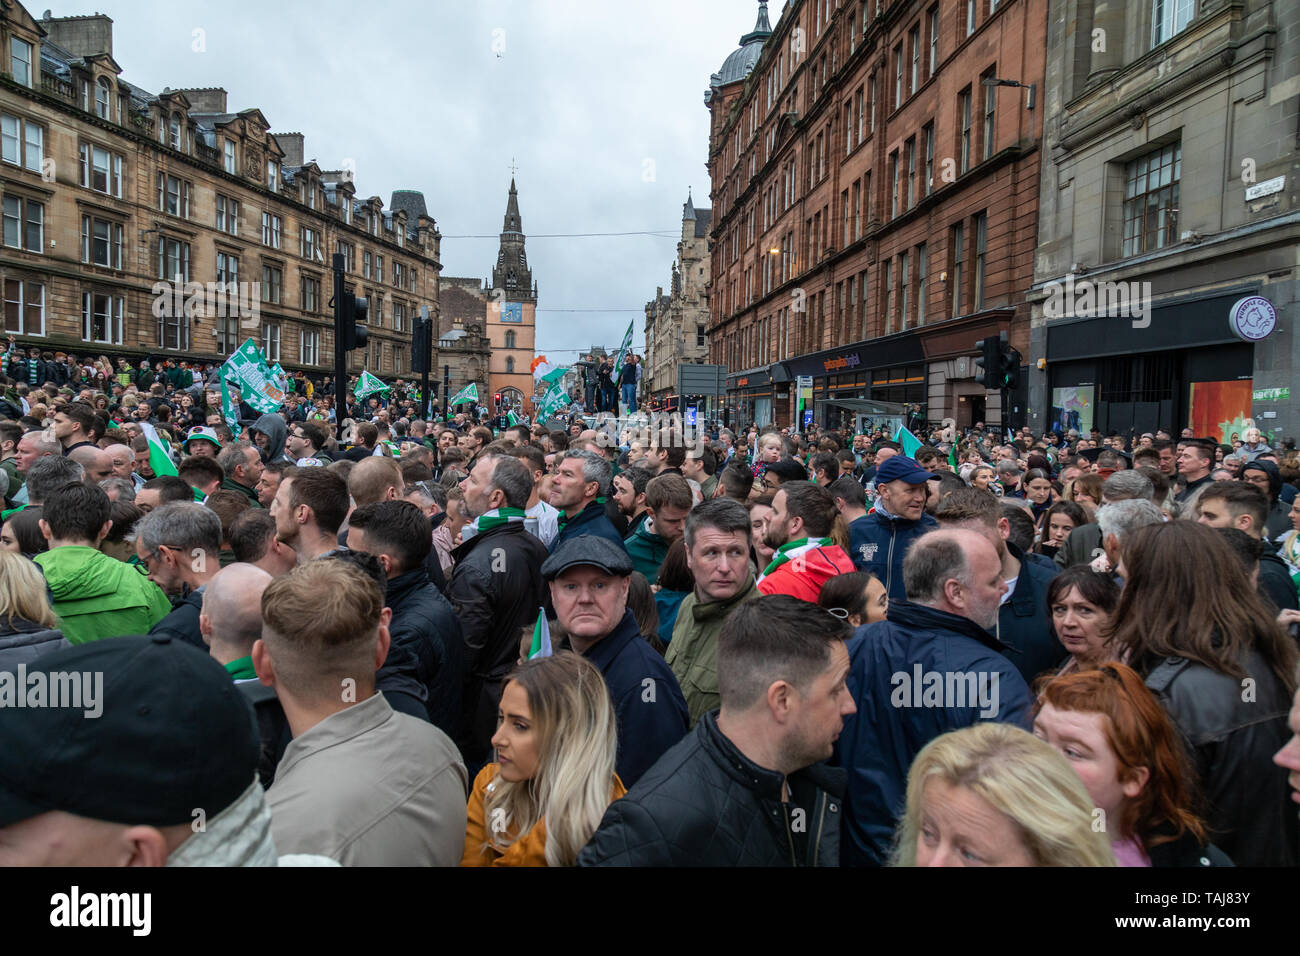 Glasgow Celtic football club win the Scottish Cup against Hearts but the open top parade bus organised afterwards is cancelled amid safety fears.Thousands of fans gathered for almost two hours at the city’s Saltmarket and Glasgow Cross in anticipation of its arrival. Stock Photo